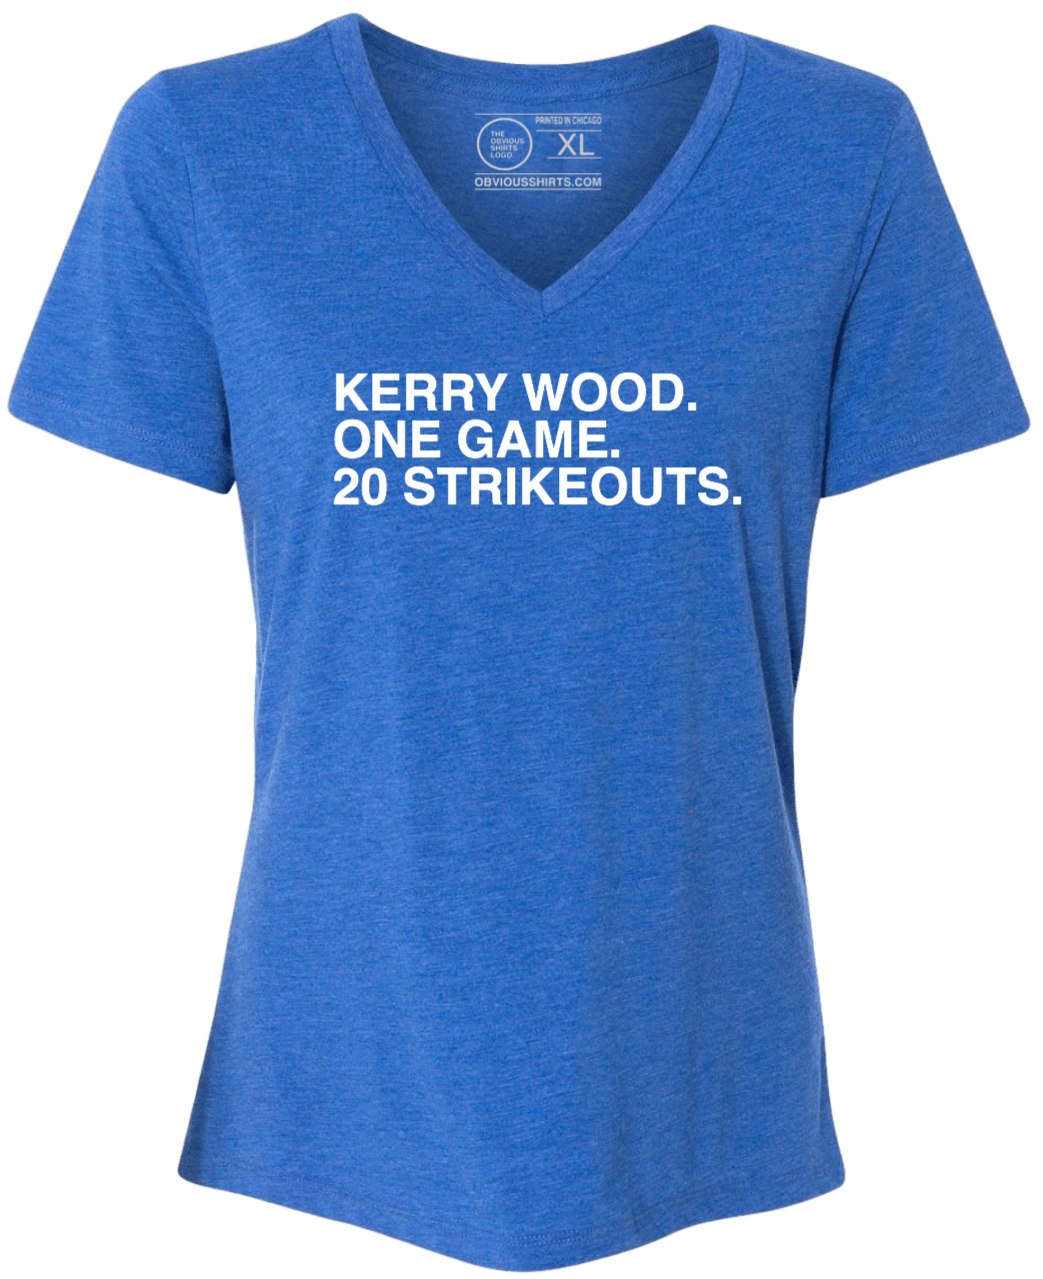 KERRY WOOD. ONE GAME. 20 STRIKEOUTS. (WOMEN'S V-NECK) - OBVIOUS SHIRTS.